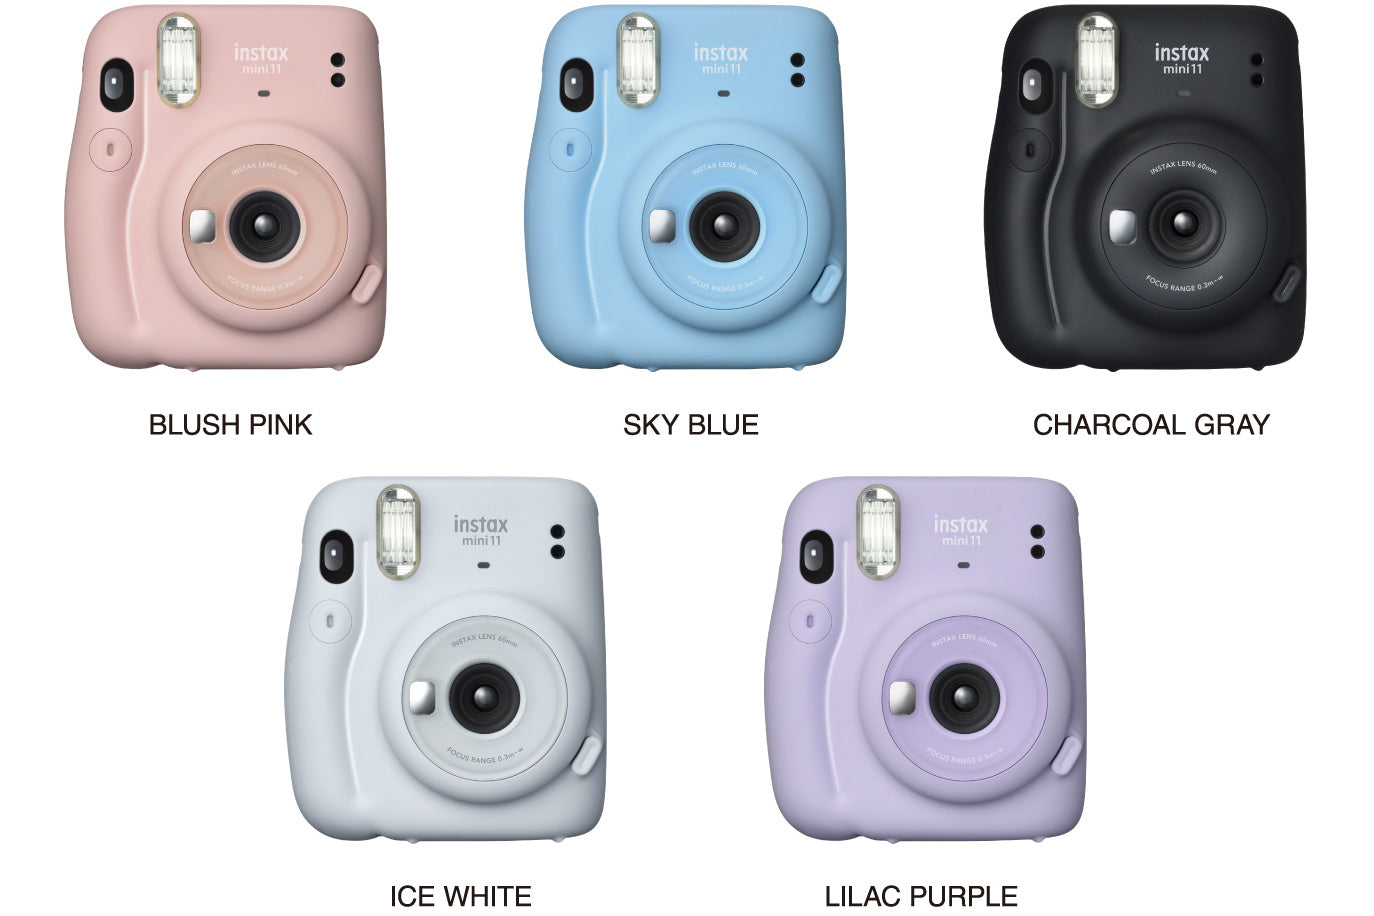 FUJIFILM Instax Mini 11 Jellybean/ 12 Instant Camera - OFFICIAL Fujifilm Philippines 1-Year Warranty | Blossom Pink, Clay White, Lilac Purple, Mint Green, Pastel Blue | JG Superstore